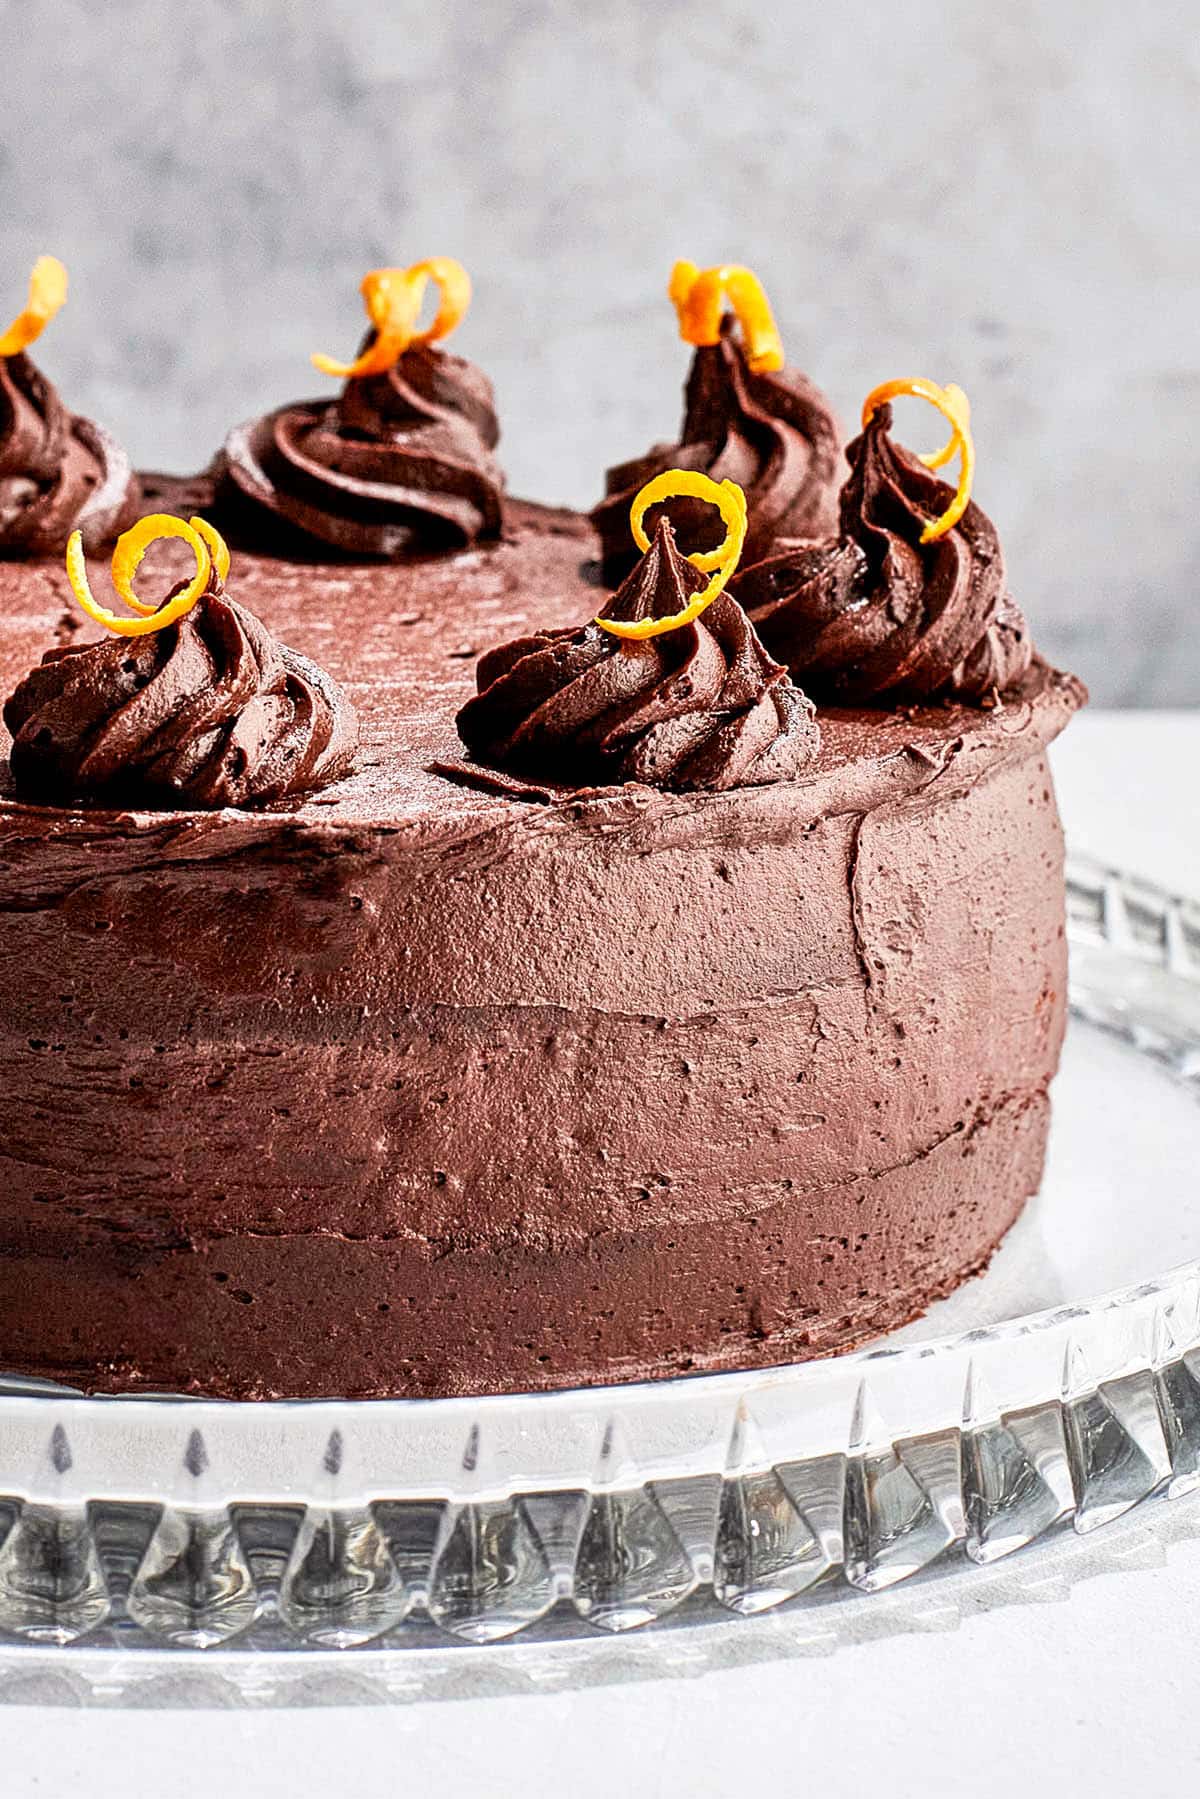 Close up of a chocolate frosted cake with frosting mounds and orange peel.